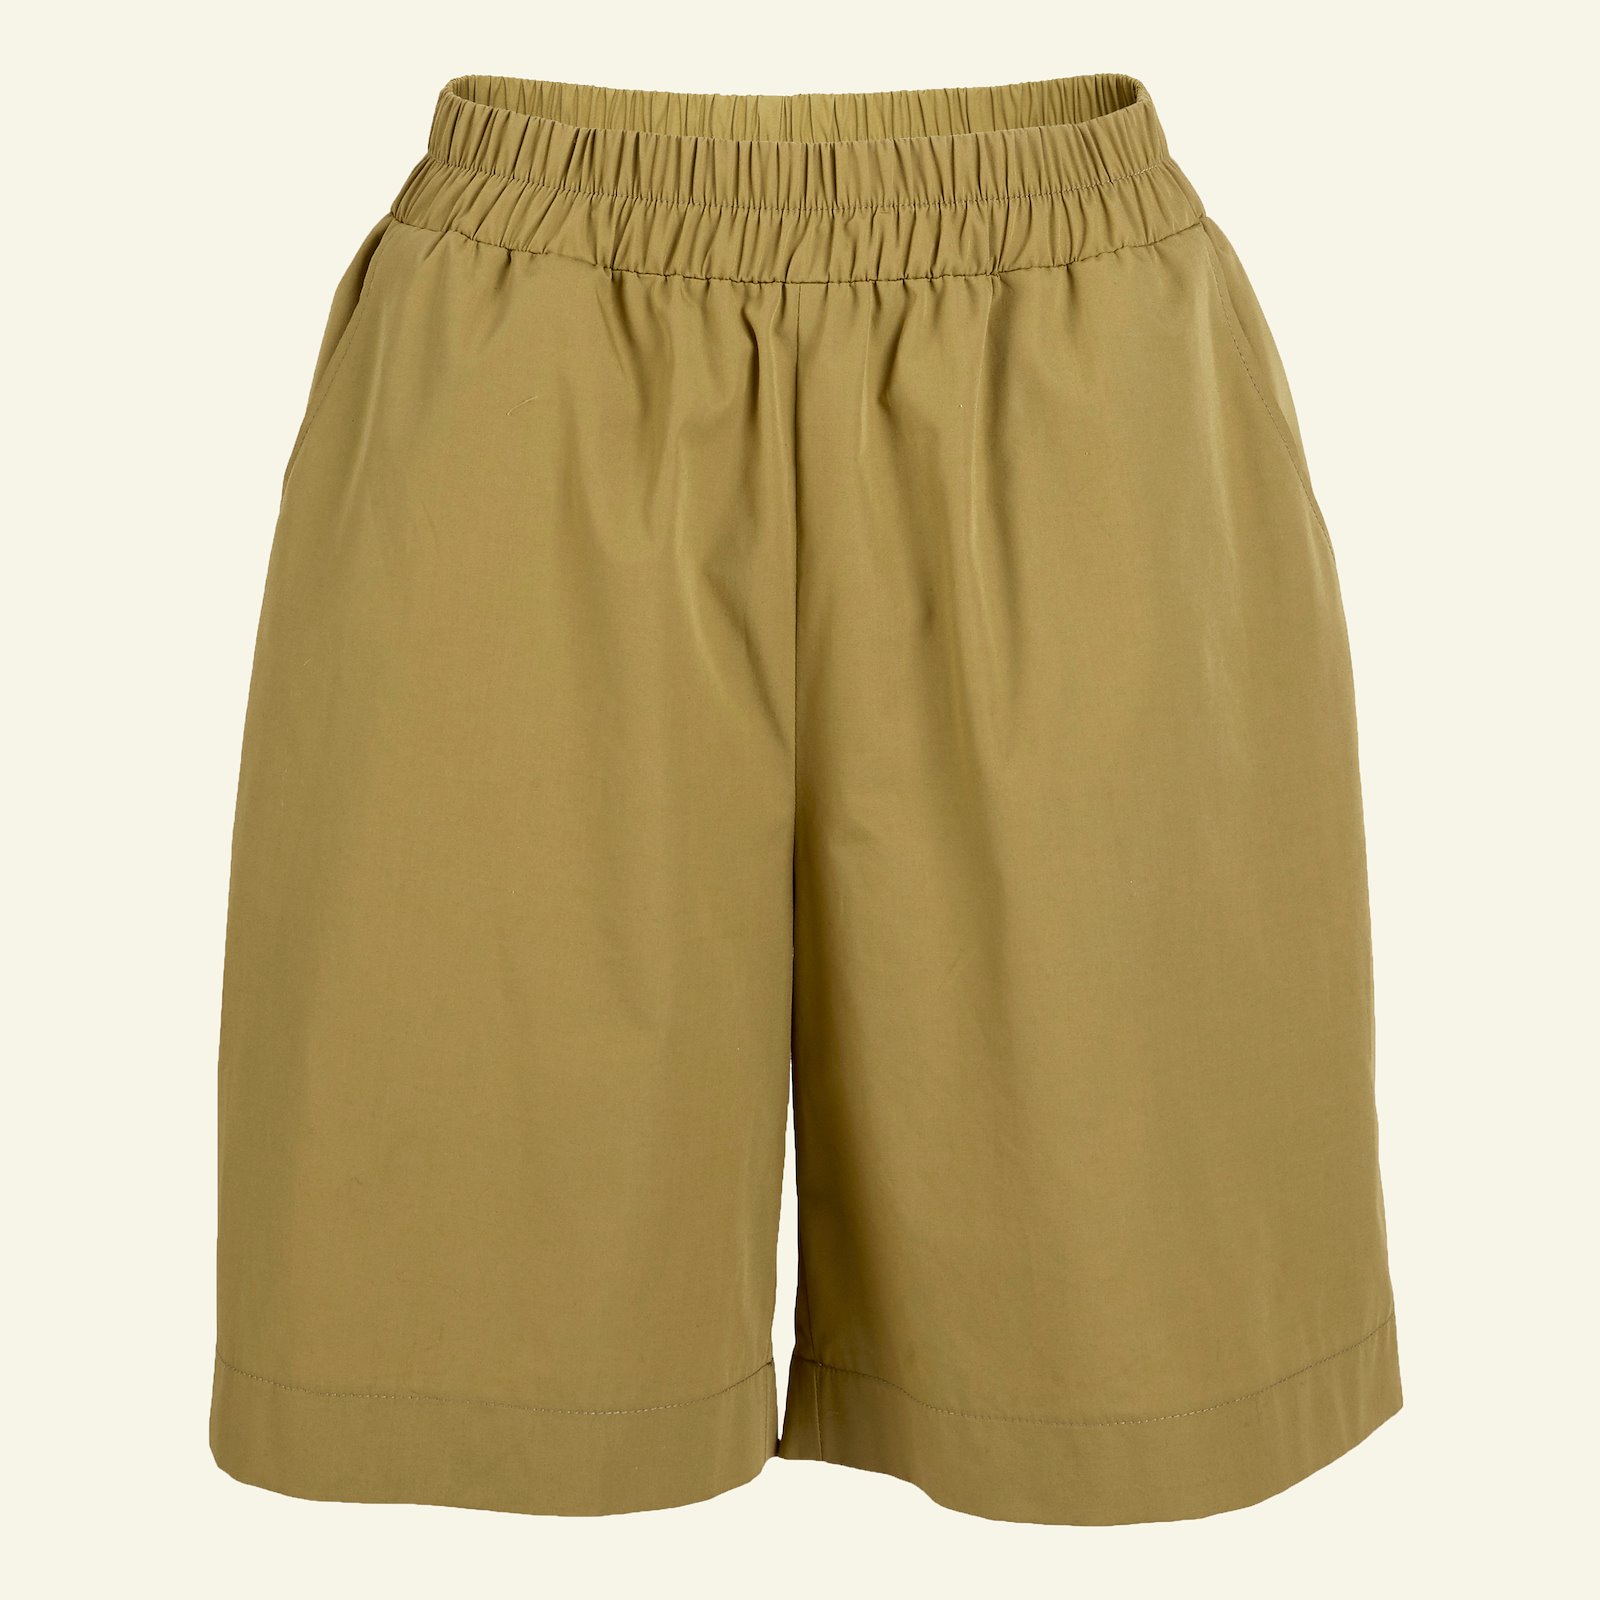 Wide trousers/shorts w. pockets, 40/12 p20051_501926_sskit